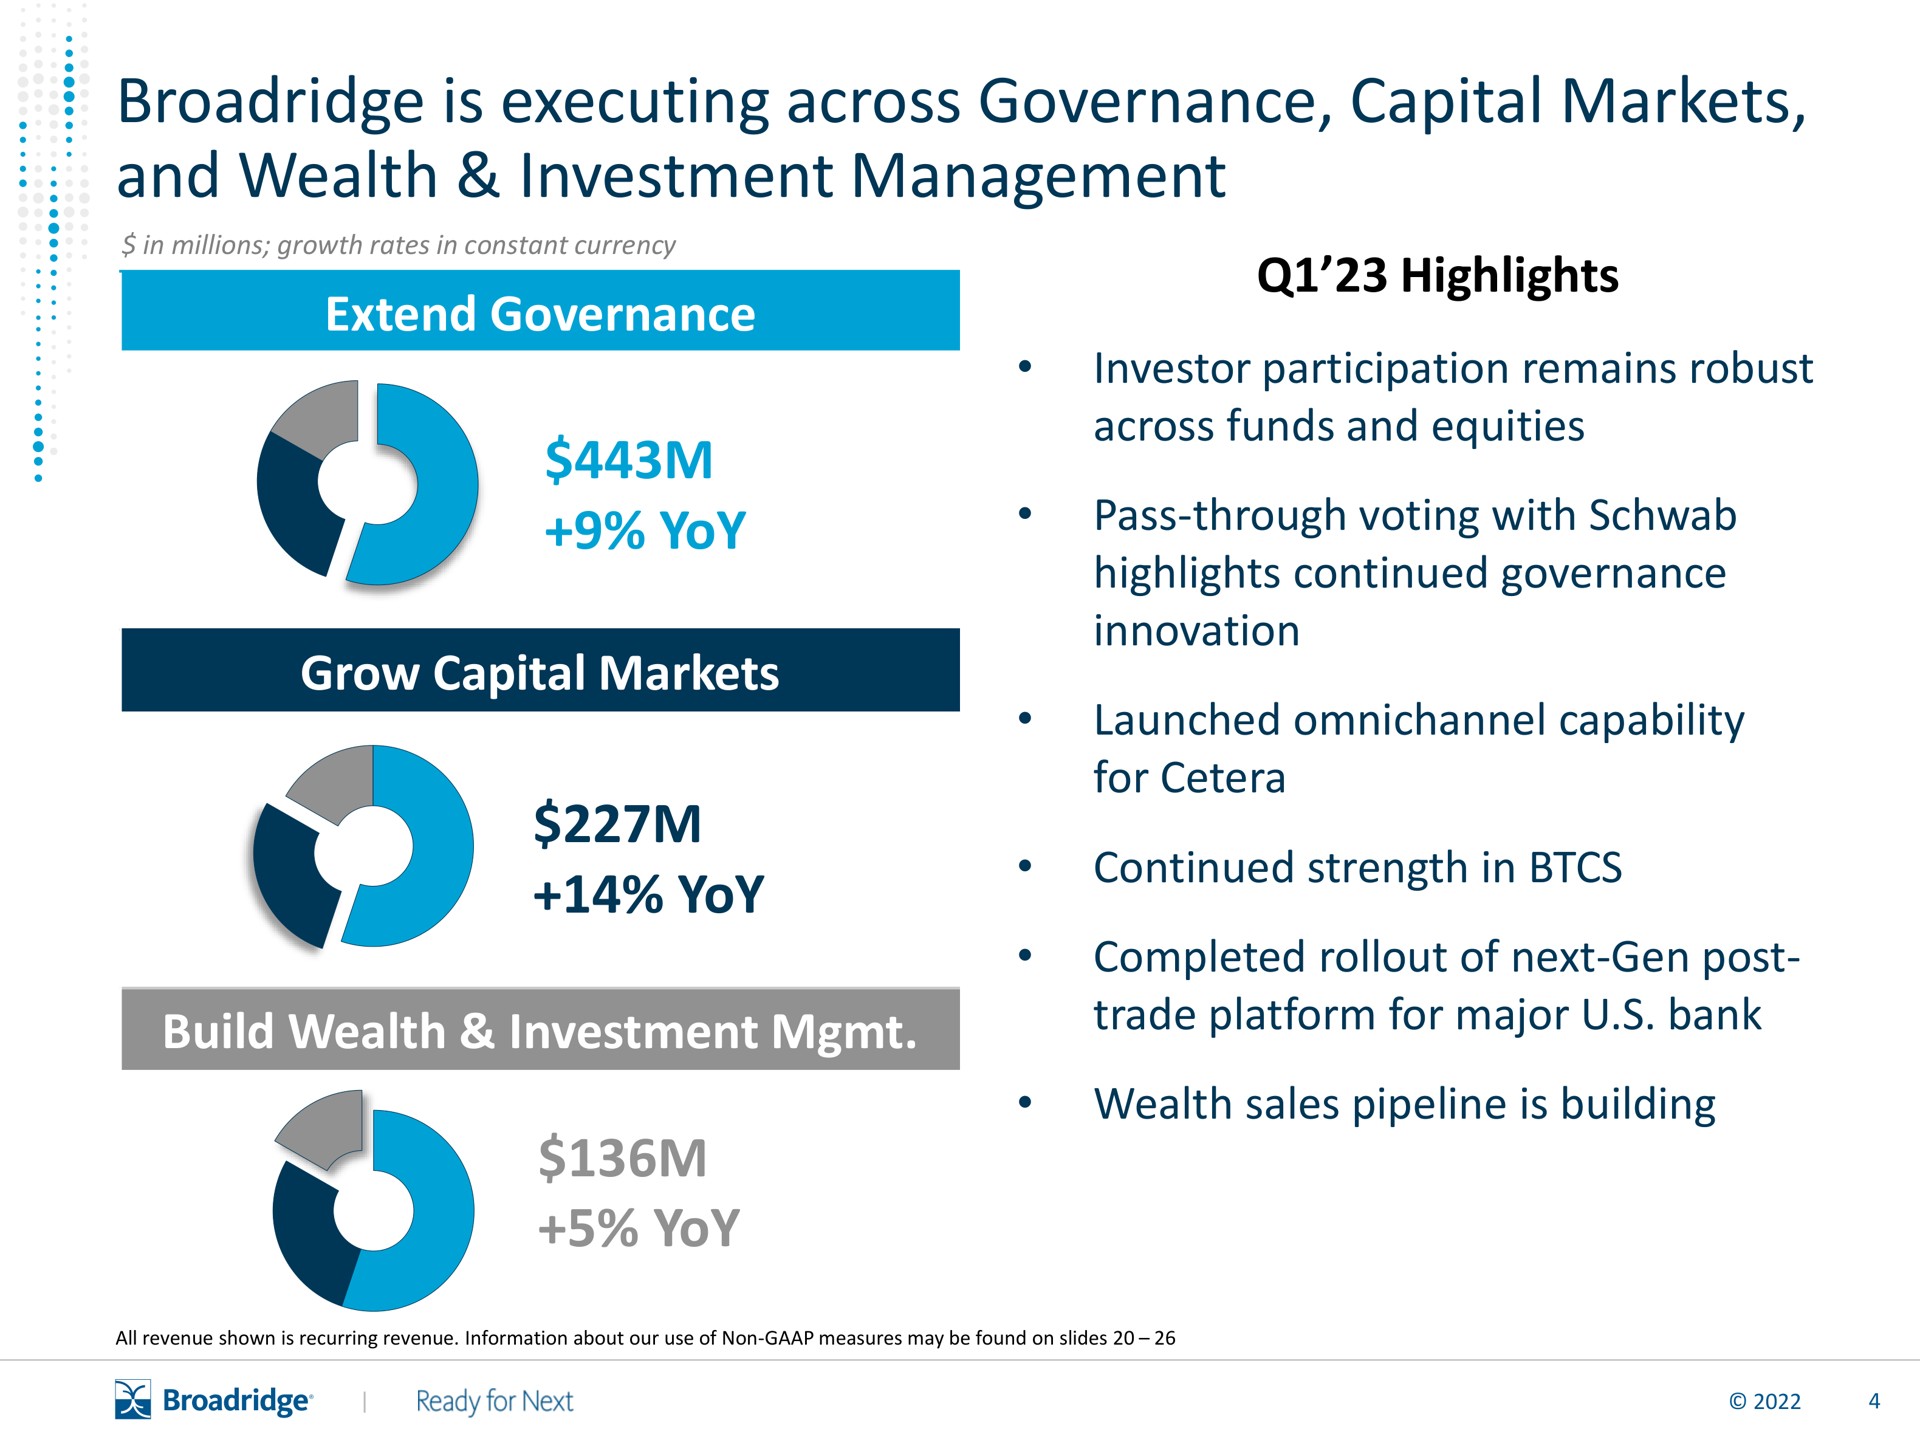 is executing across governance capital markets and wealth investment management extend governance yoy grow capital markets yoy build wealth investment yoy highlights | Broadridge Financial Solutions